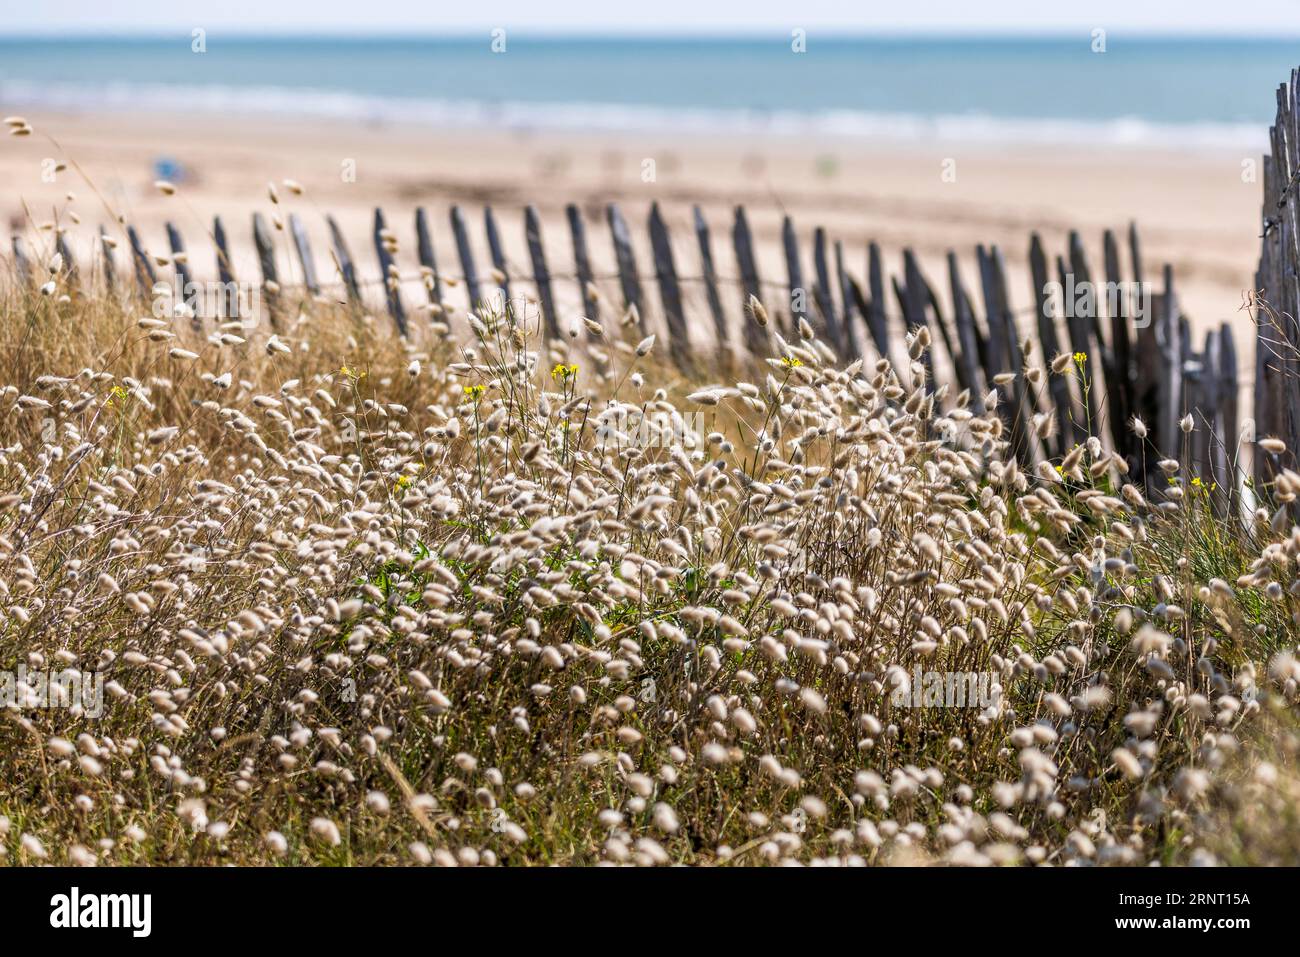 Beach. Sea, dune landscape with flowering grasses and the wooden picket fence typical of the region, Portbail, English Channel, Cotentin, Manche Stock Photo